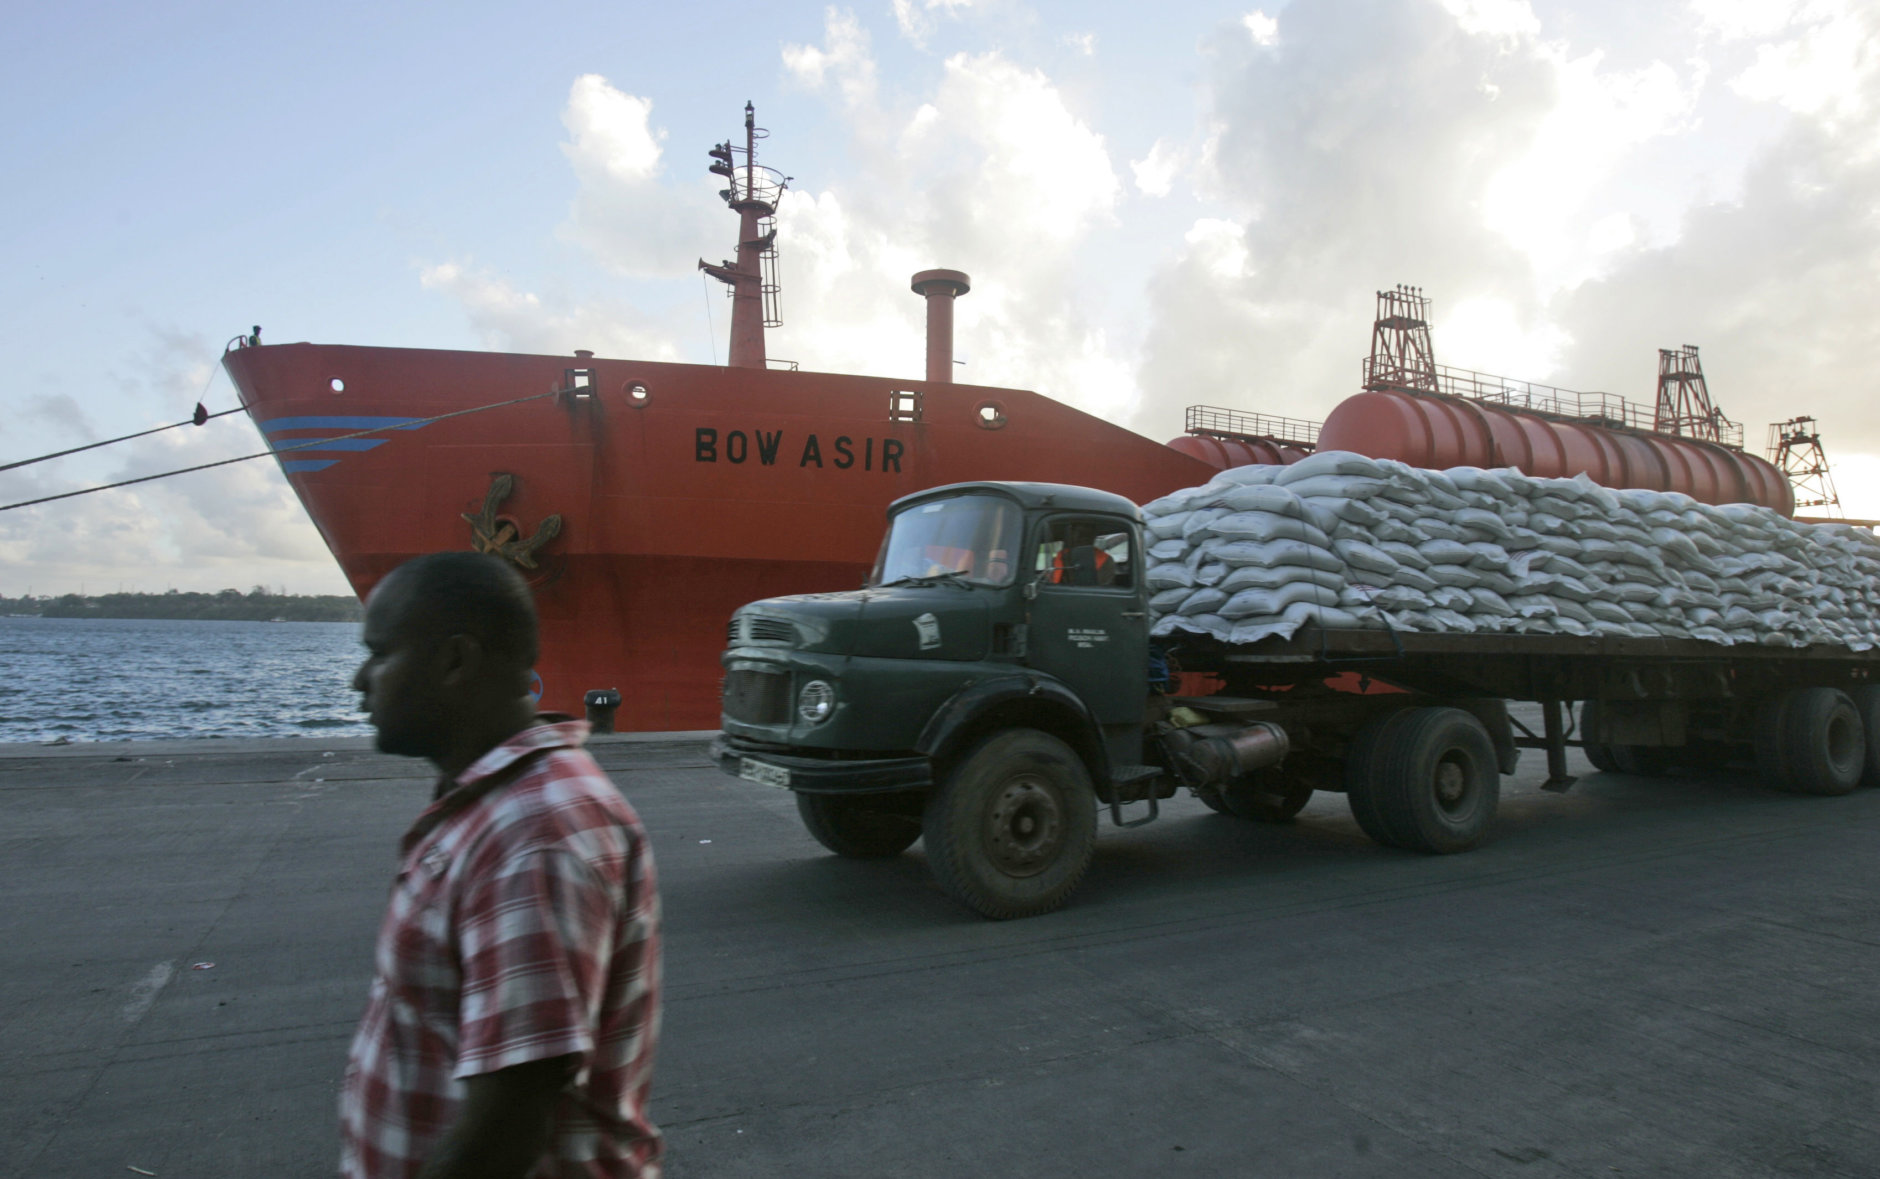 A truck carrying World Food Programe maize drives past the Norwegian-registered Bow Asir, Monday, April 13, 2009 after it  arrived in the port of Mombasa. The owner of a Norwegian tanker says it has been released by Pirates, two weeks after it was seized off the Somali coast, and all 27 of its crew members are unhurt.The 23,000-ton Bow Asir was captured 250 miles (400 kilometers) off the Somali coast March 26 when 16 to 18 pirates carrying machine guns boarded it and took control. (AP Photo / Karel Prinsloo)